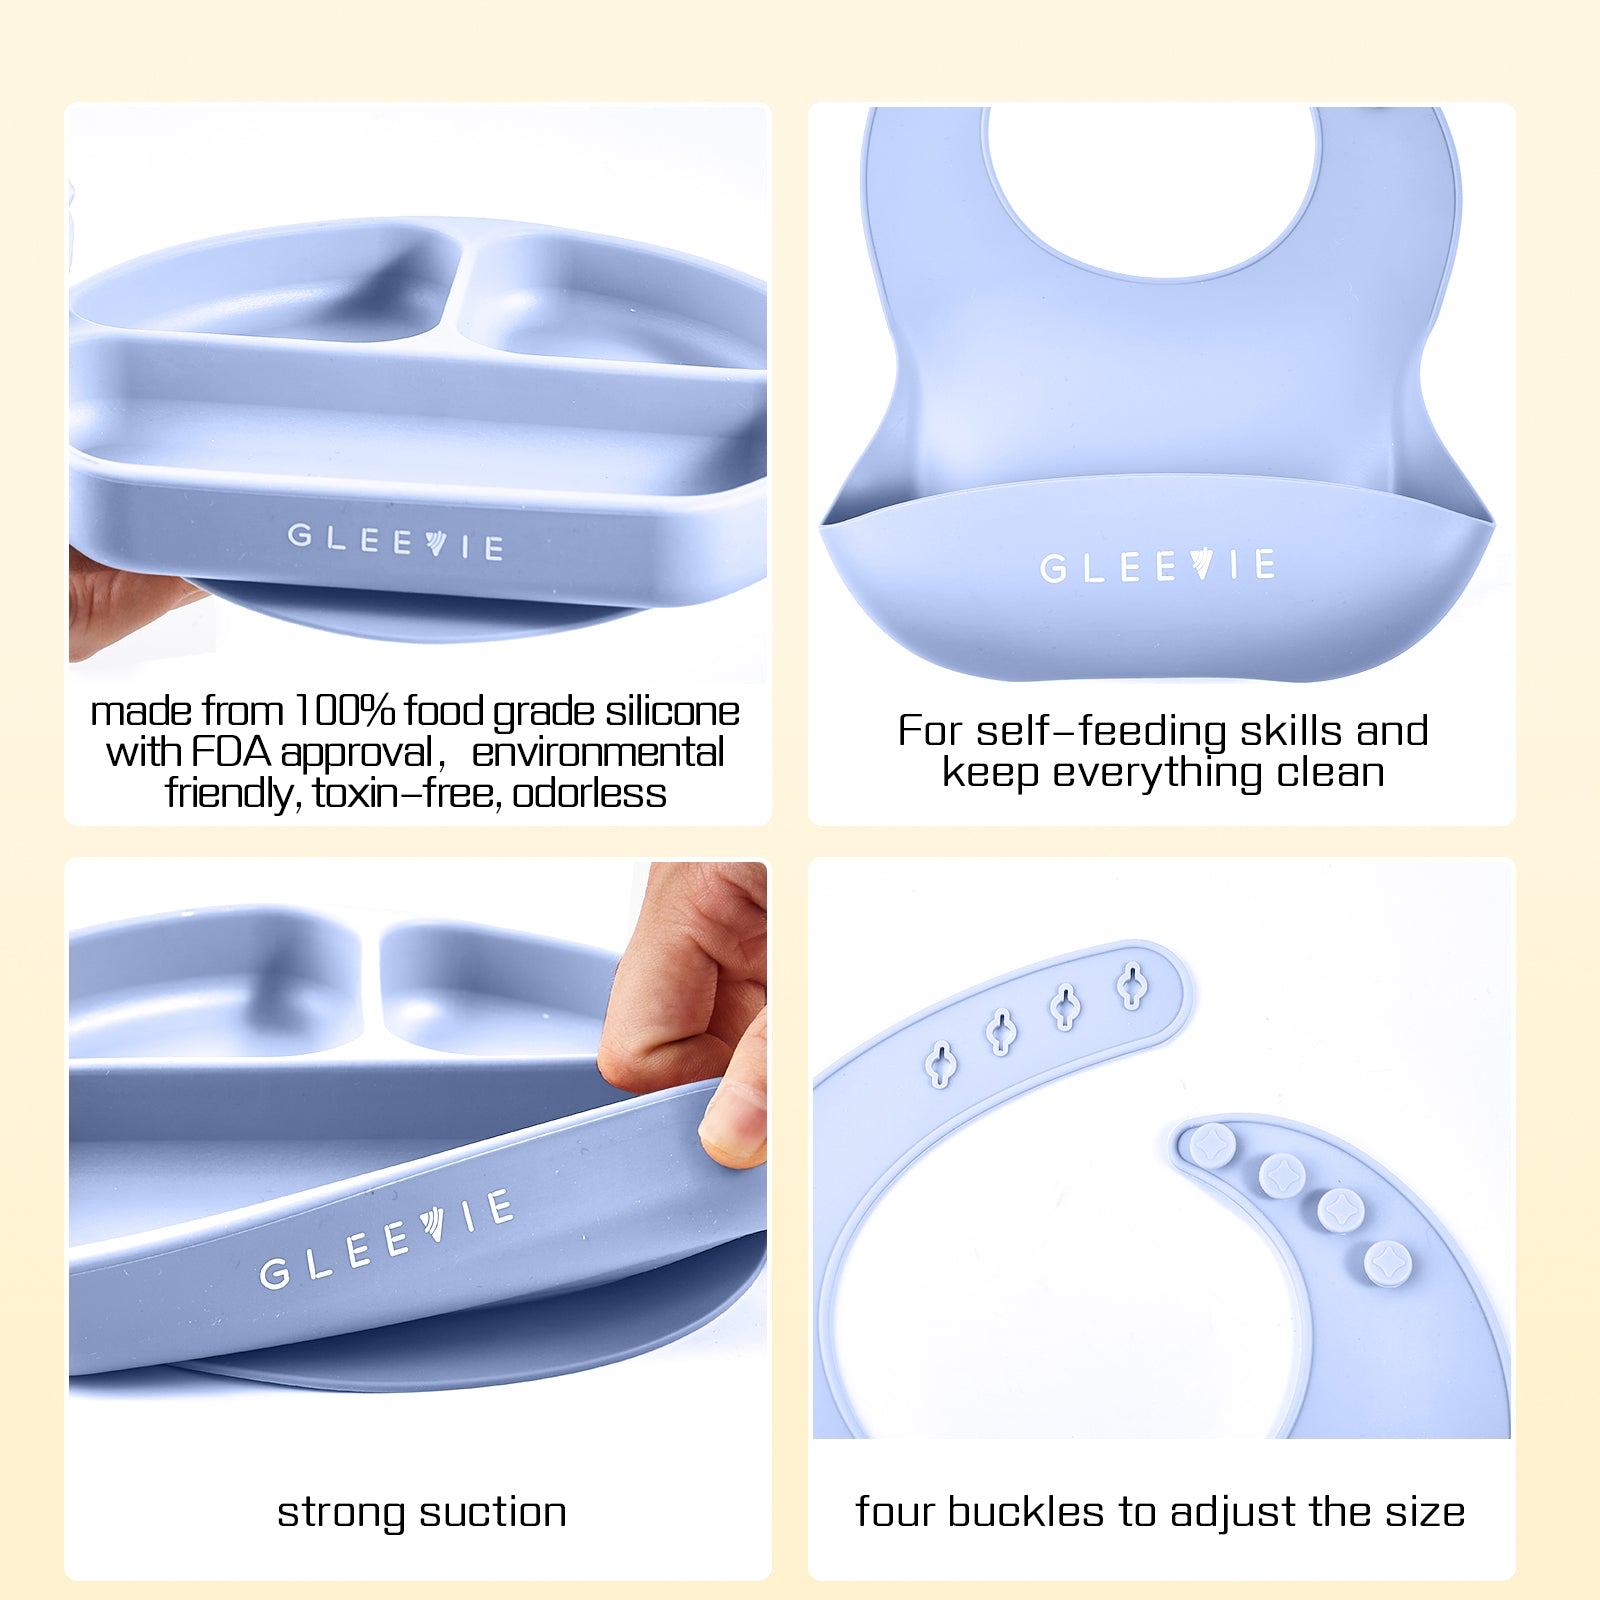 Gleevie Silicone Baby and Child Feeding Sets (4 Pieces)